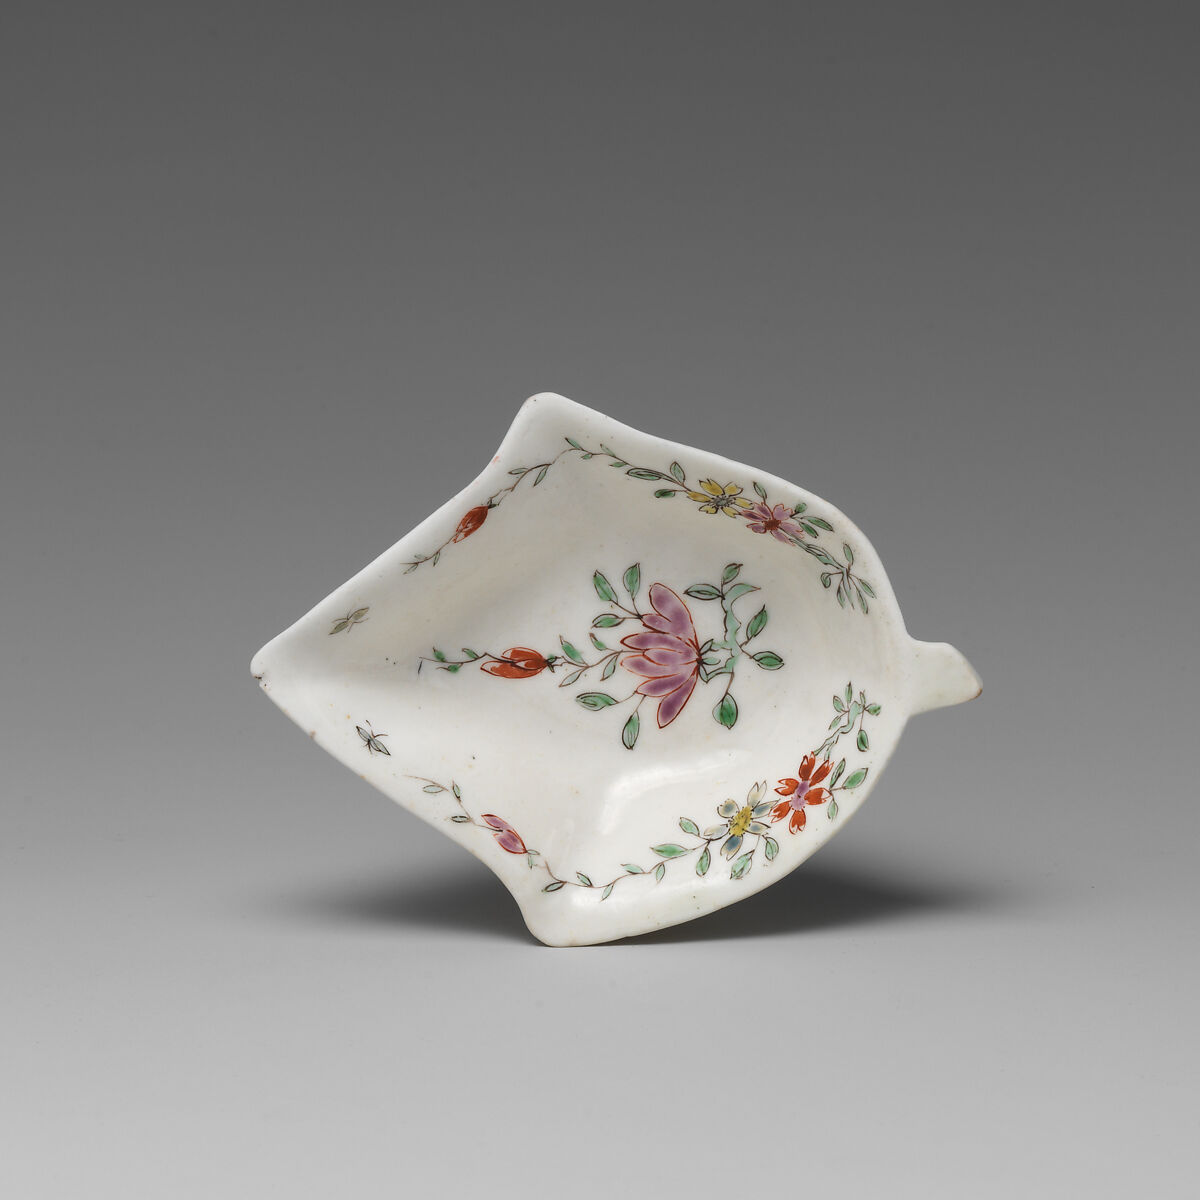 Dish (one of a pair), Soft-paste porcelain, British, Worcester 